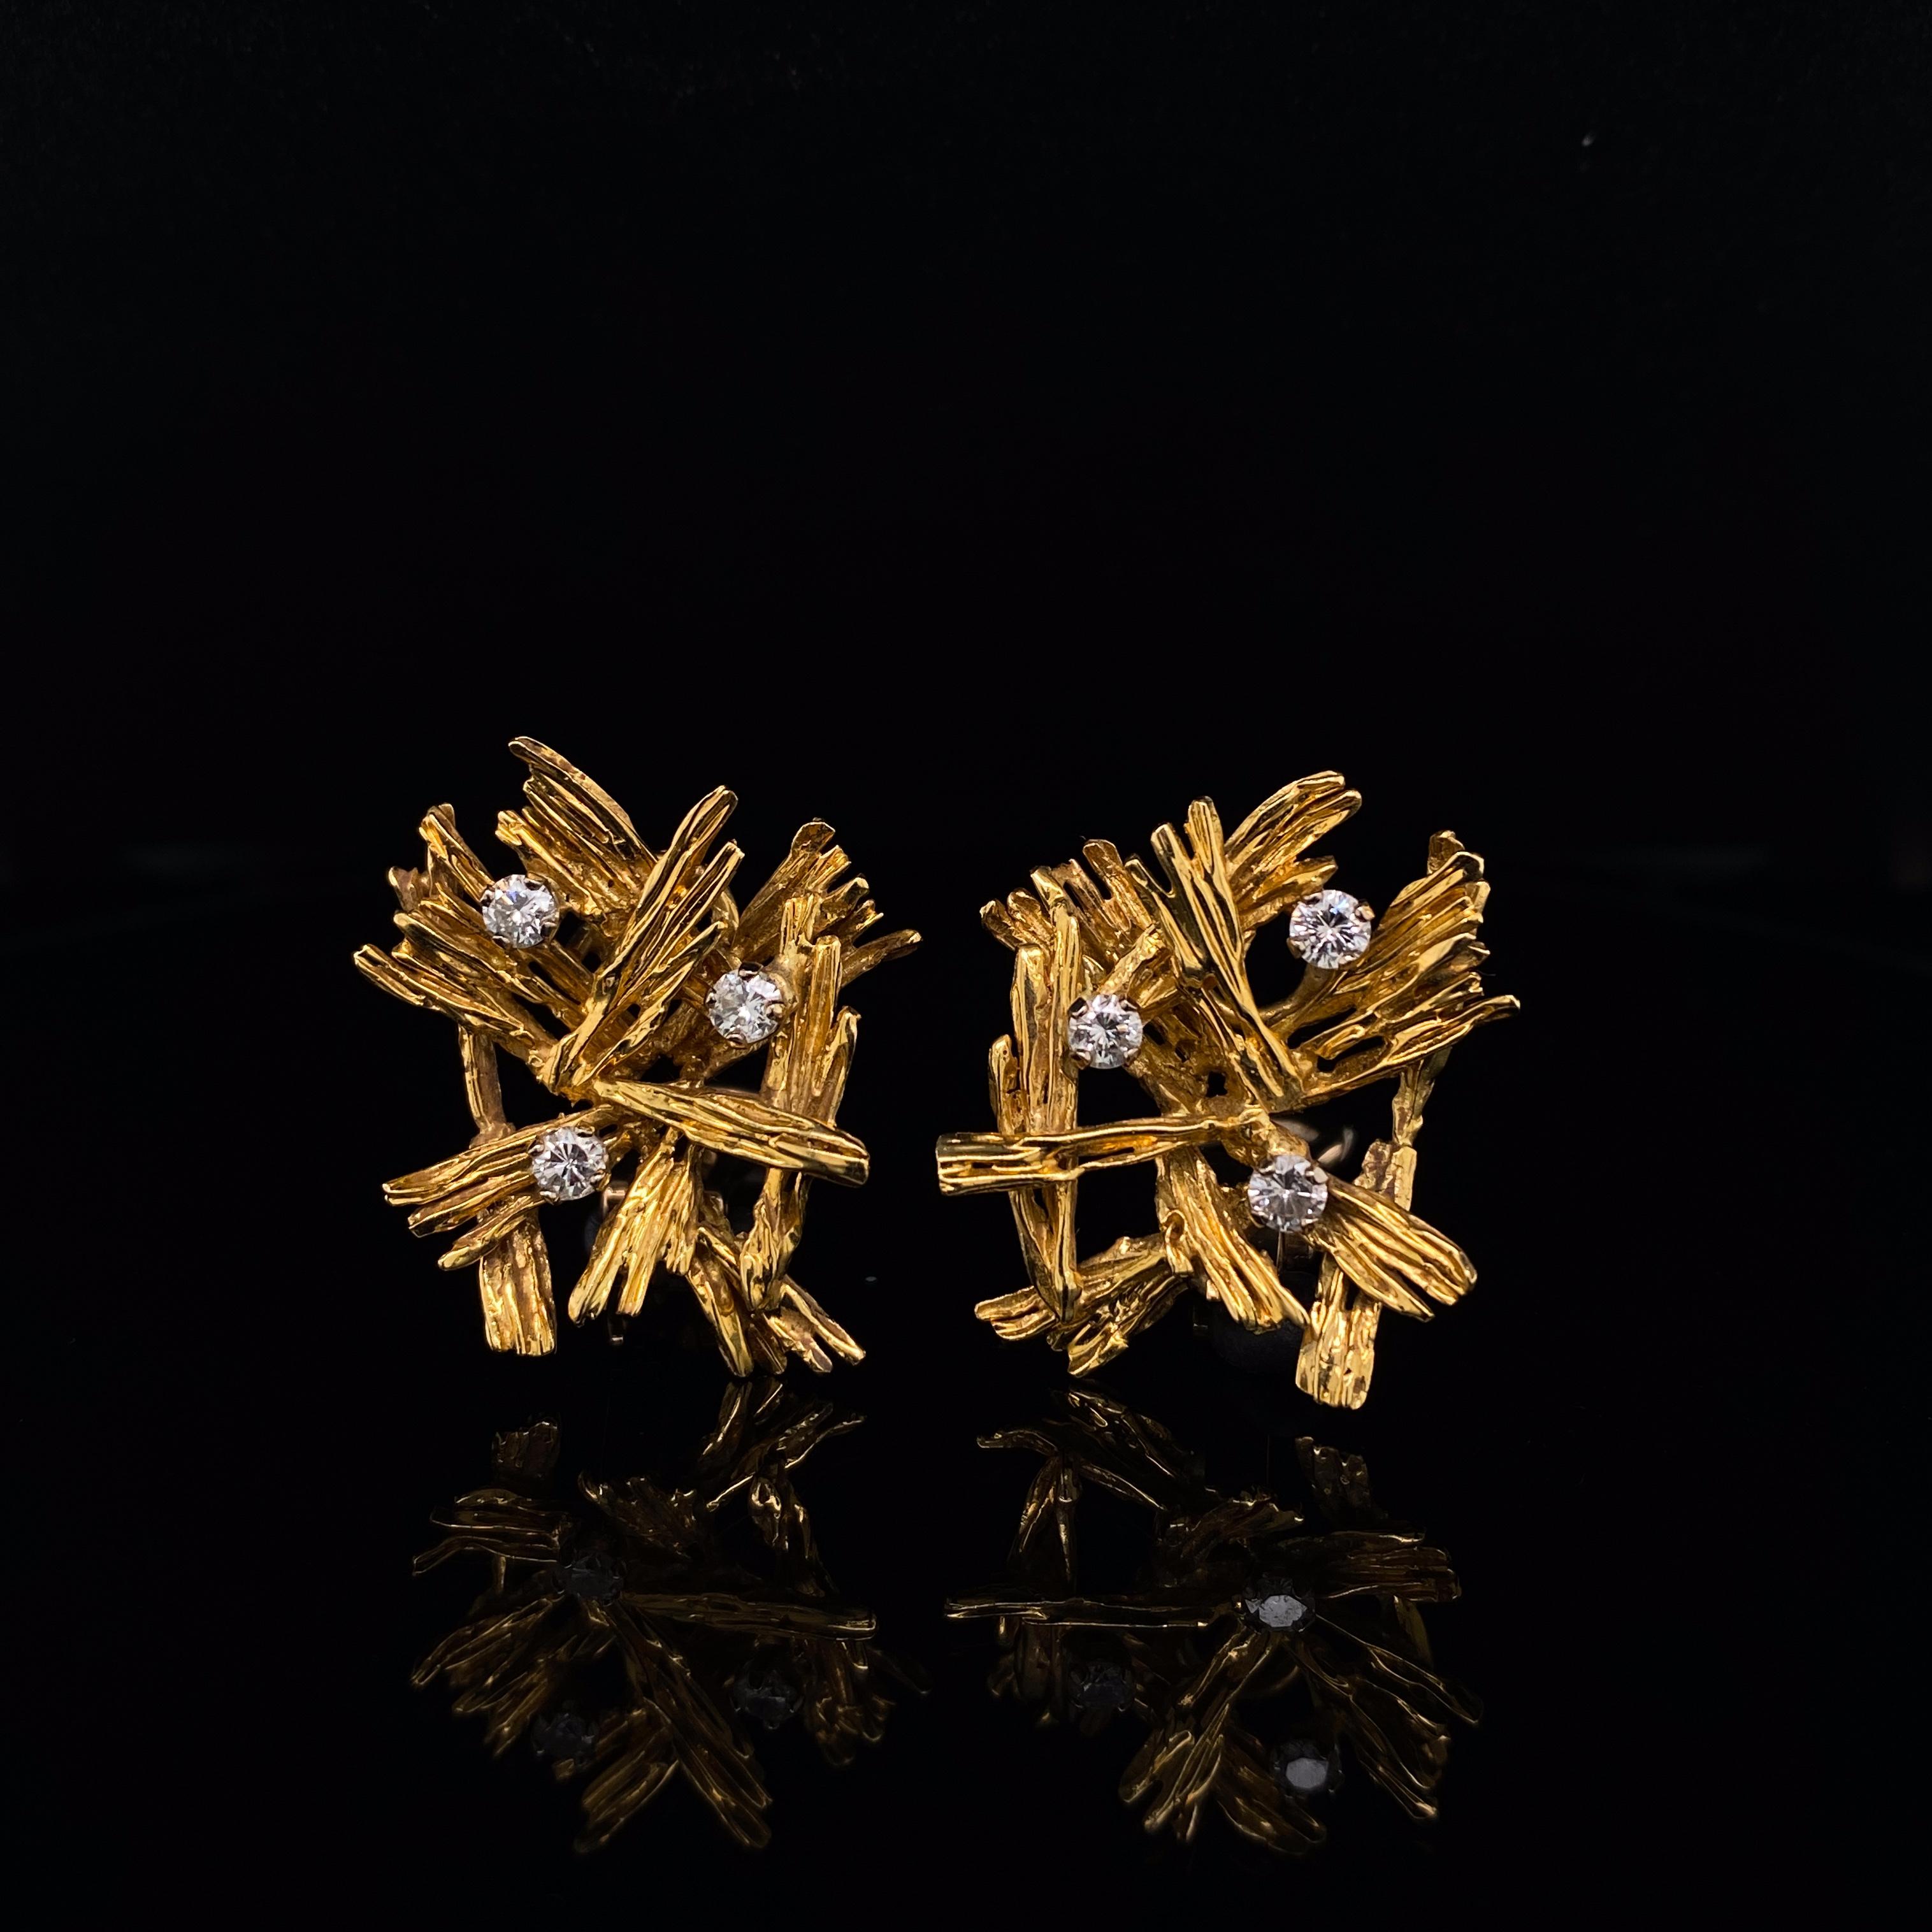 A fantastic statement pair of Kutchinsky 18 Karat Yellow Gold Diamond Clip Earrings circa 1970

Each earring is designed as an abstract spray, mounted in 18 karat textured yellow gold, highlighted by round brilliant-cut diamonds of approx. 0.50cts